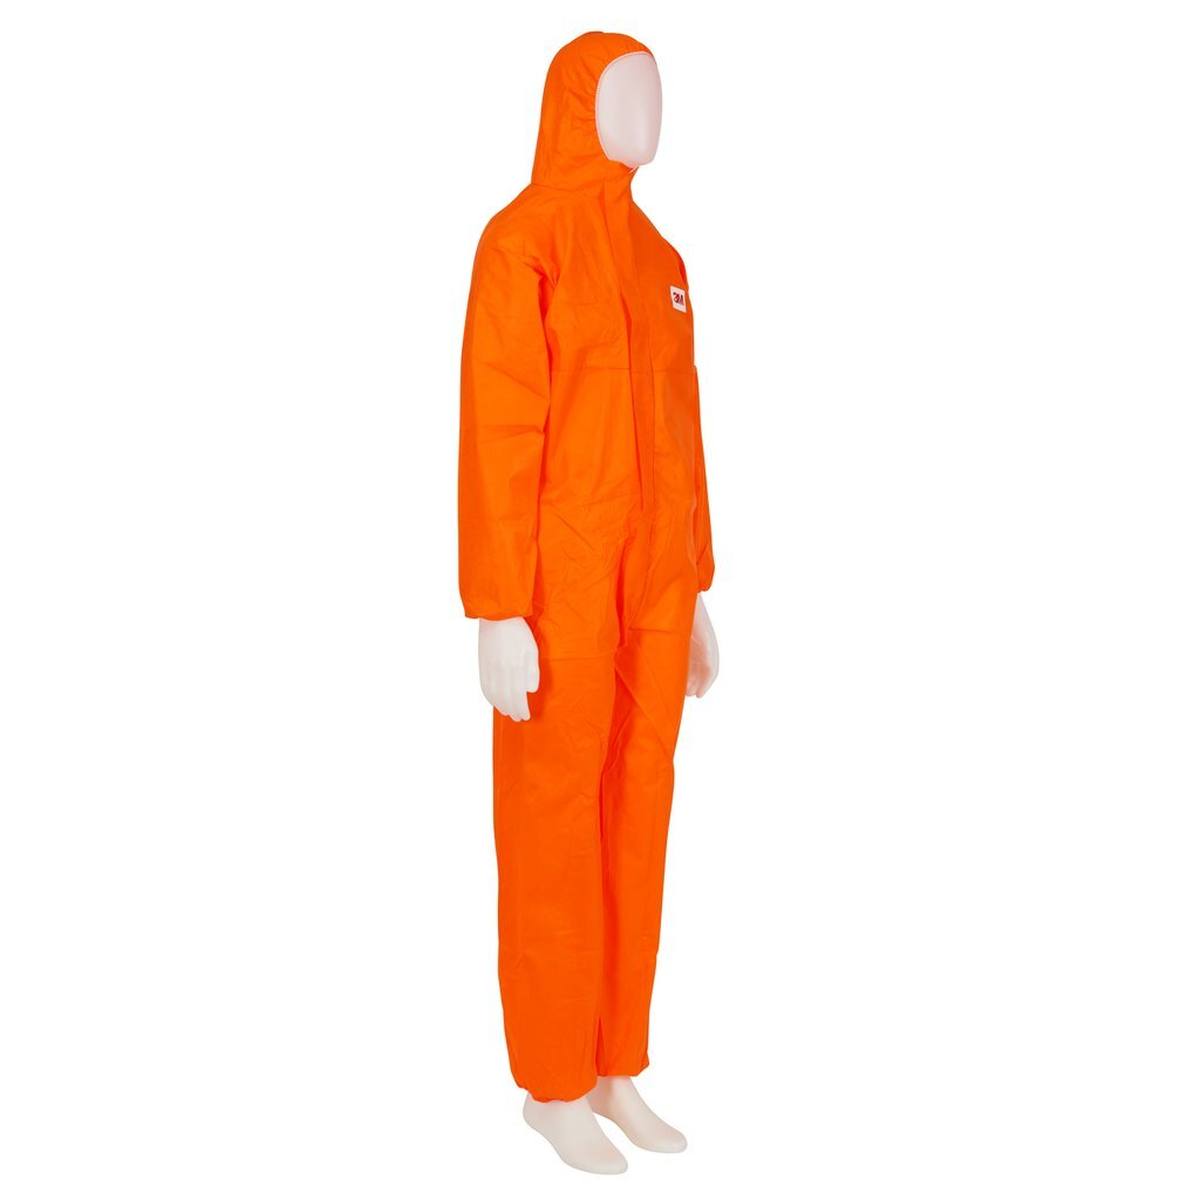 3M 4515O Protective coverall, orange, TYPE 5/6, size L, material SMMS low-lint, elastic band finish